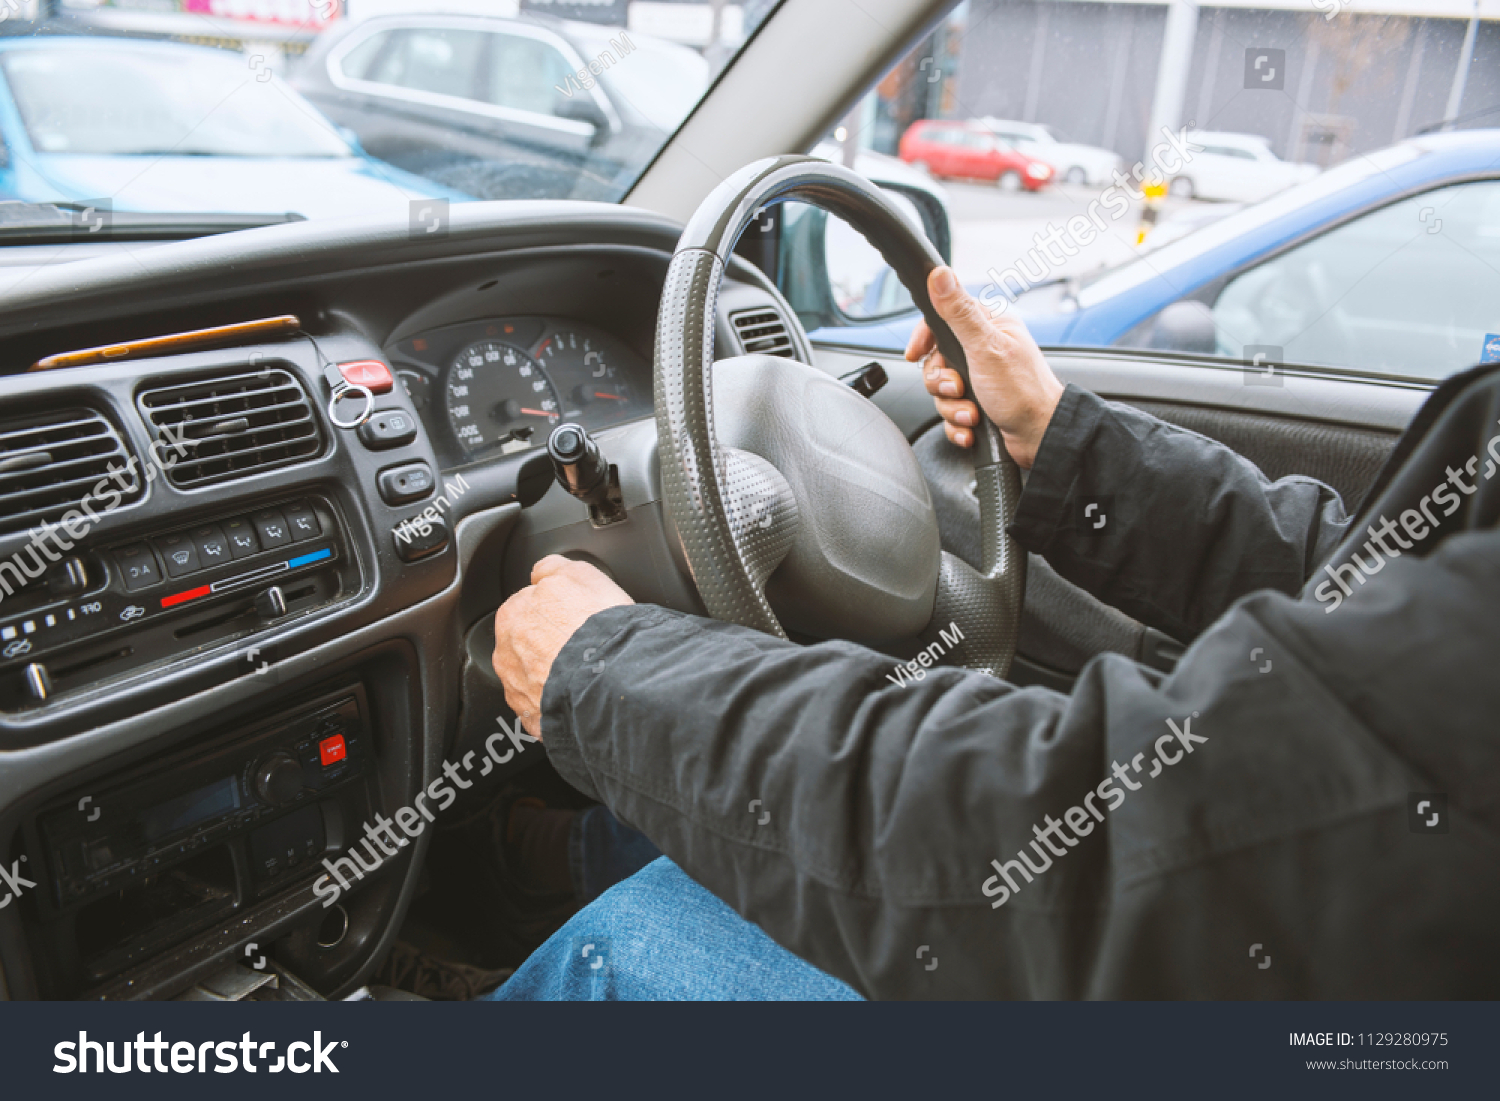 Right hand drive car. Man hand holding steering wheel #1129280975